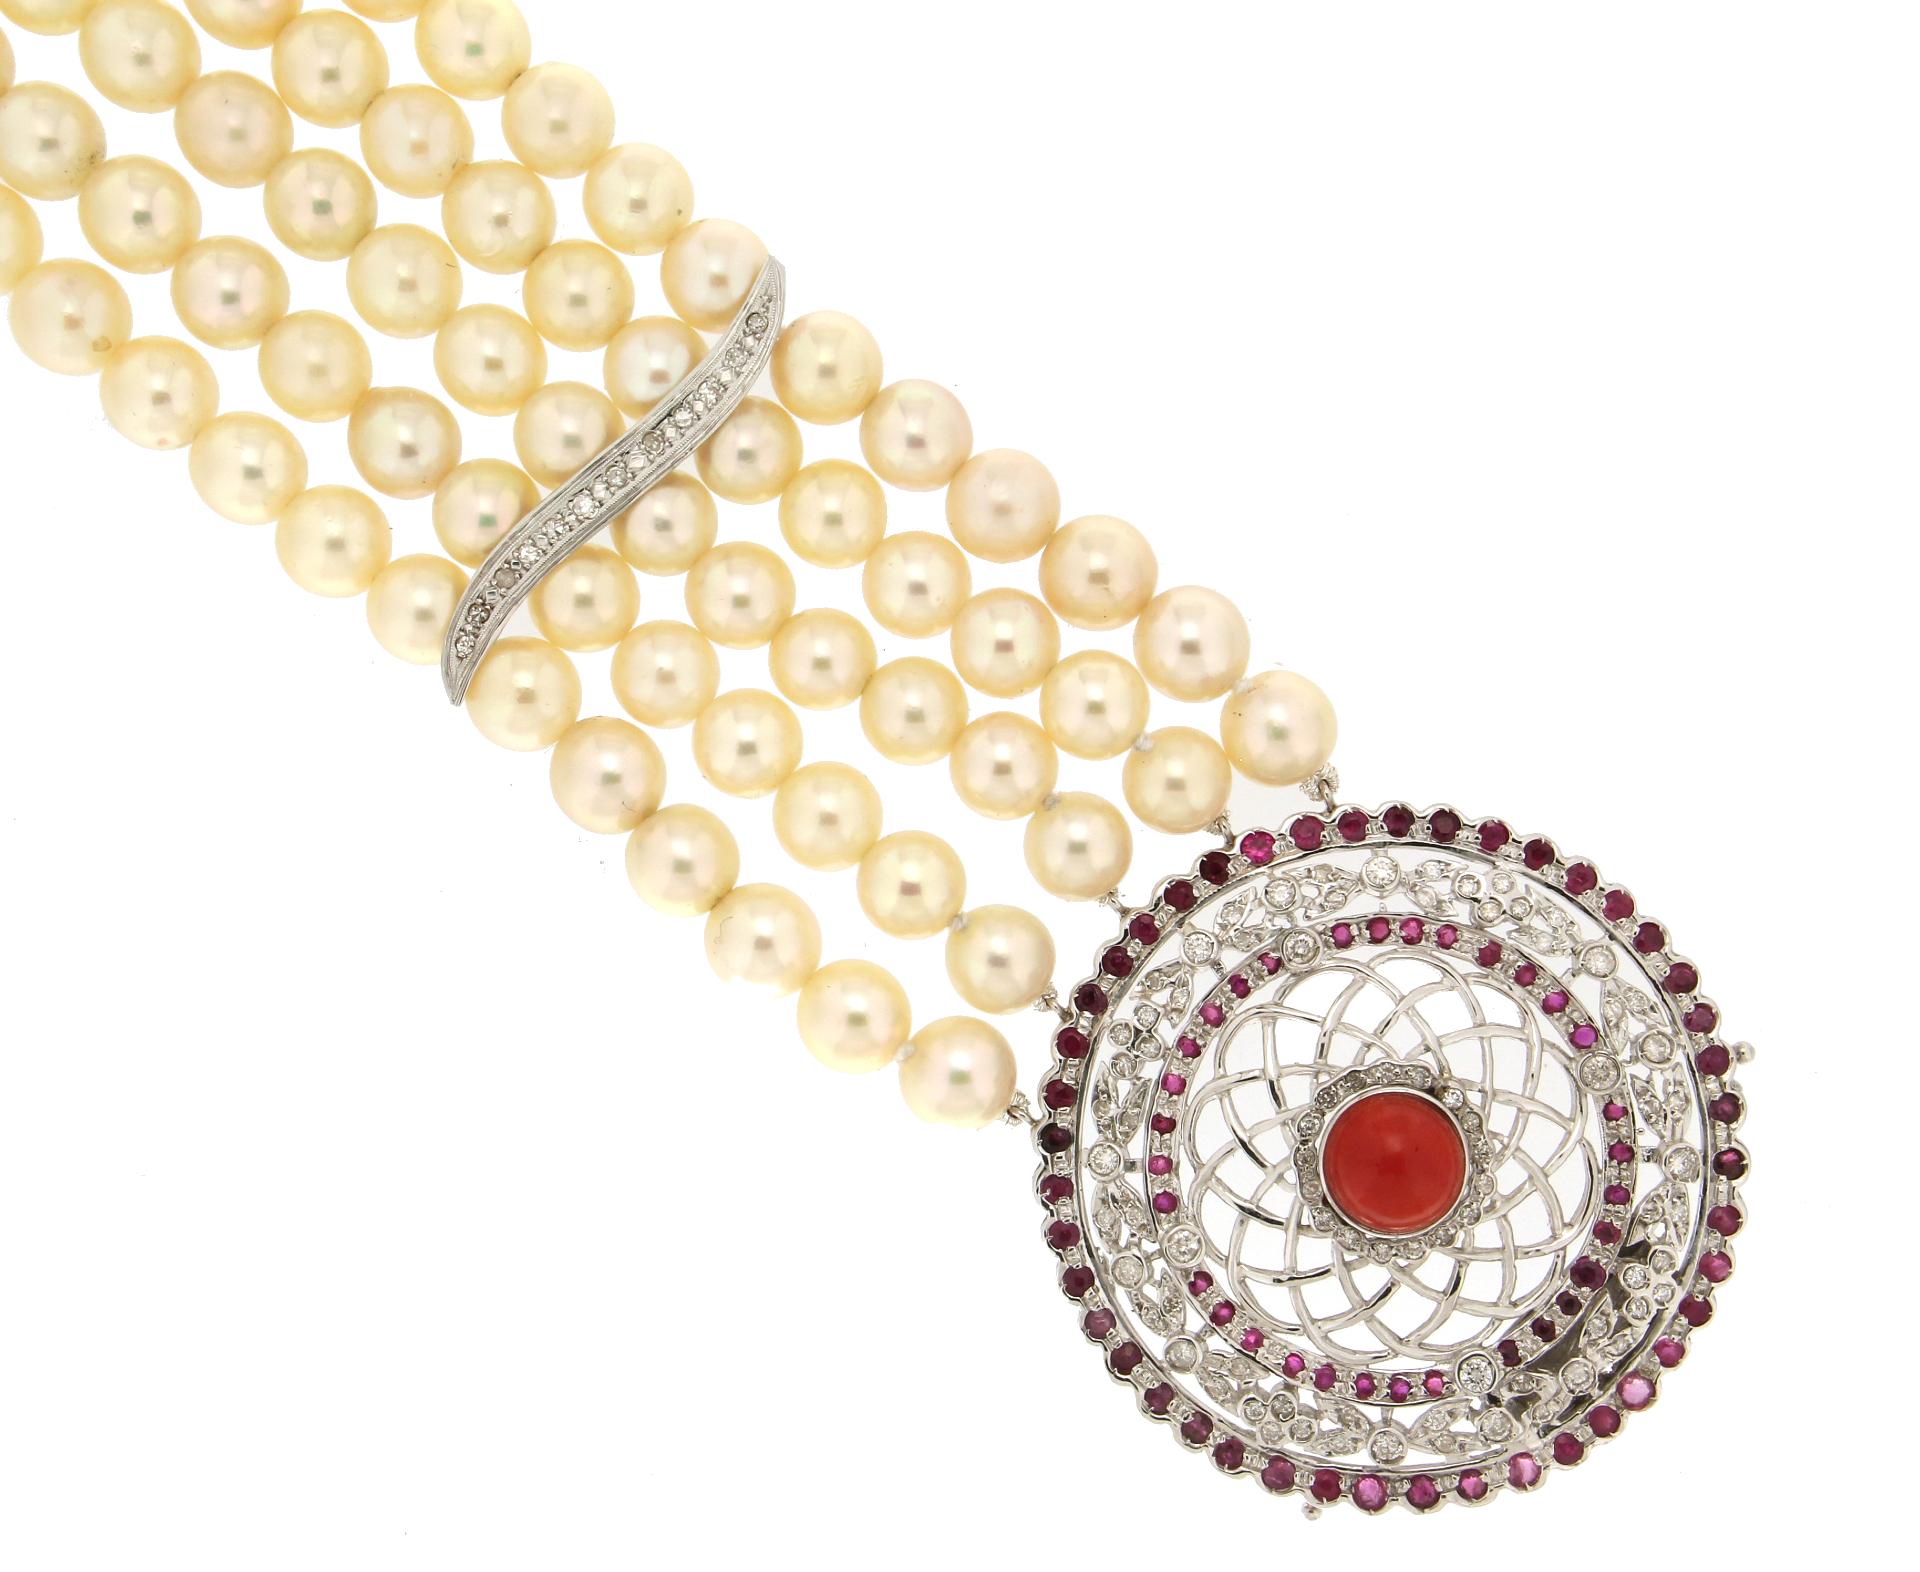 Handcraft Japanese Pearls 18 Karat White Gold Diamonds Ruby Cuff Bracelet In New Condition For Sale In Marcianise, IT